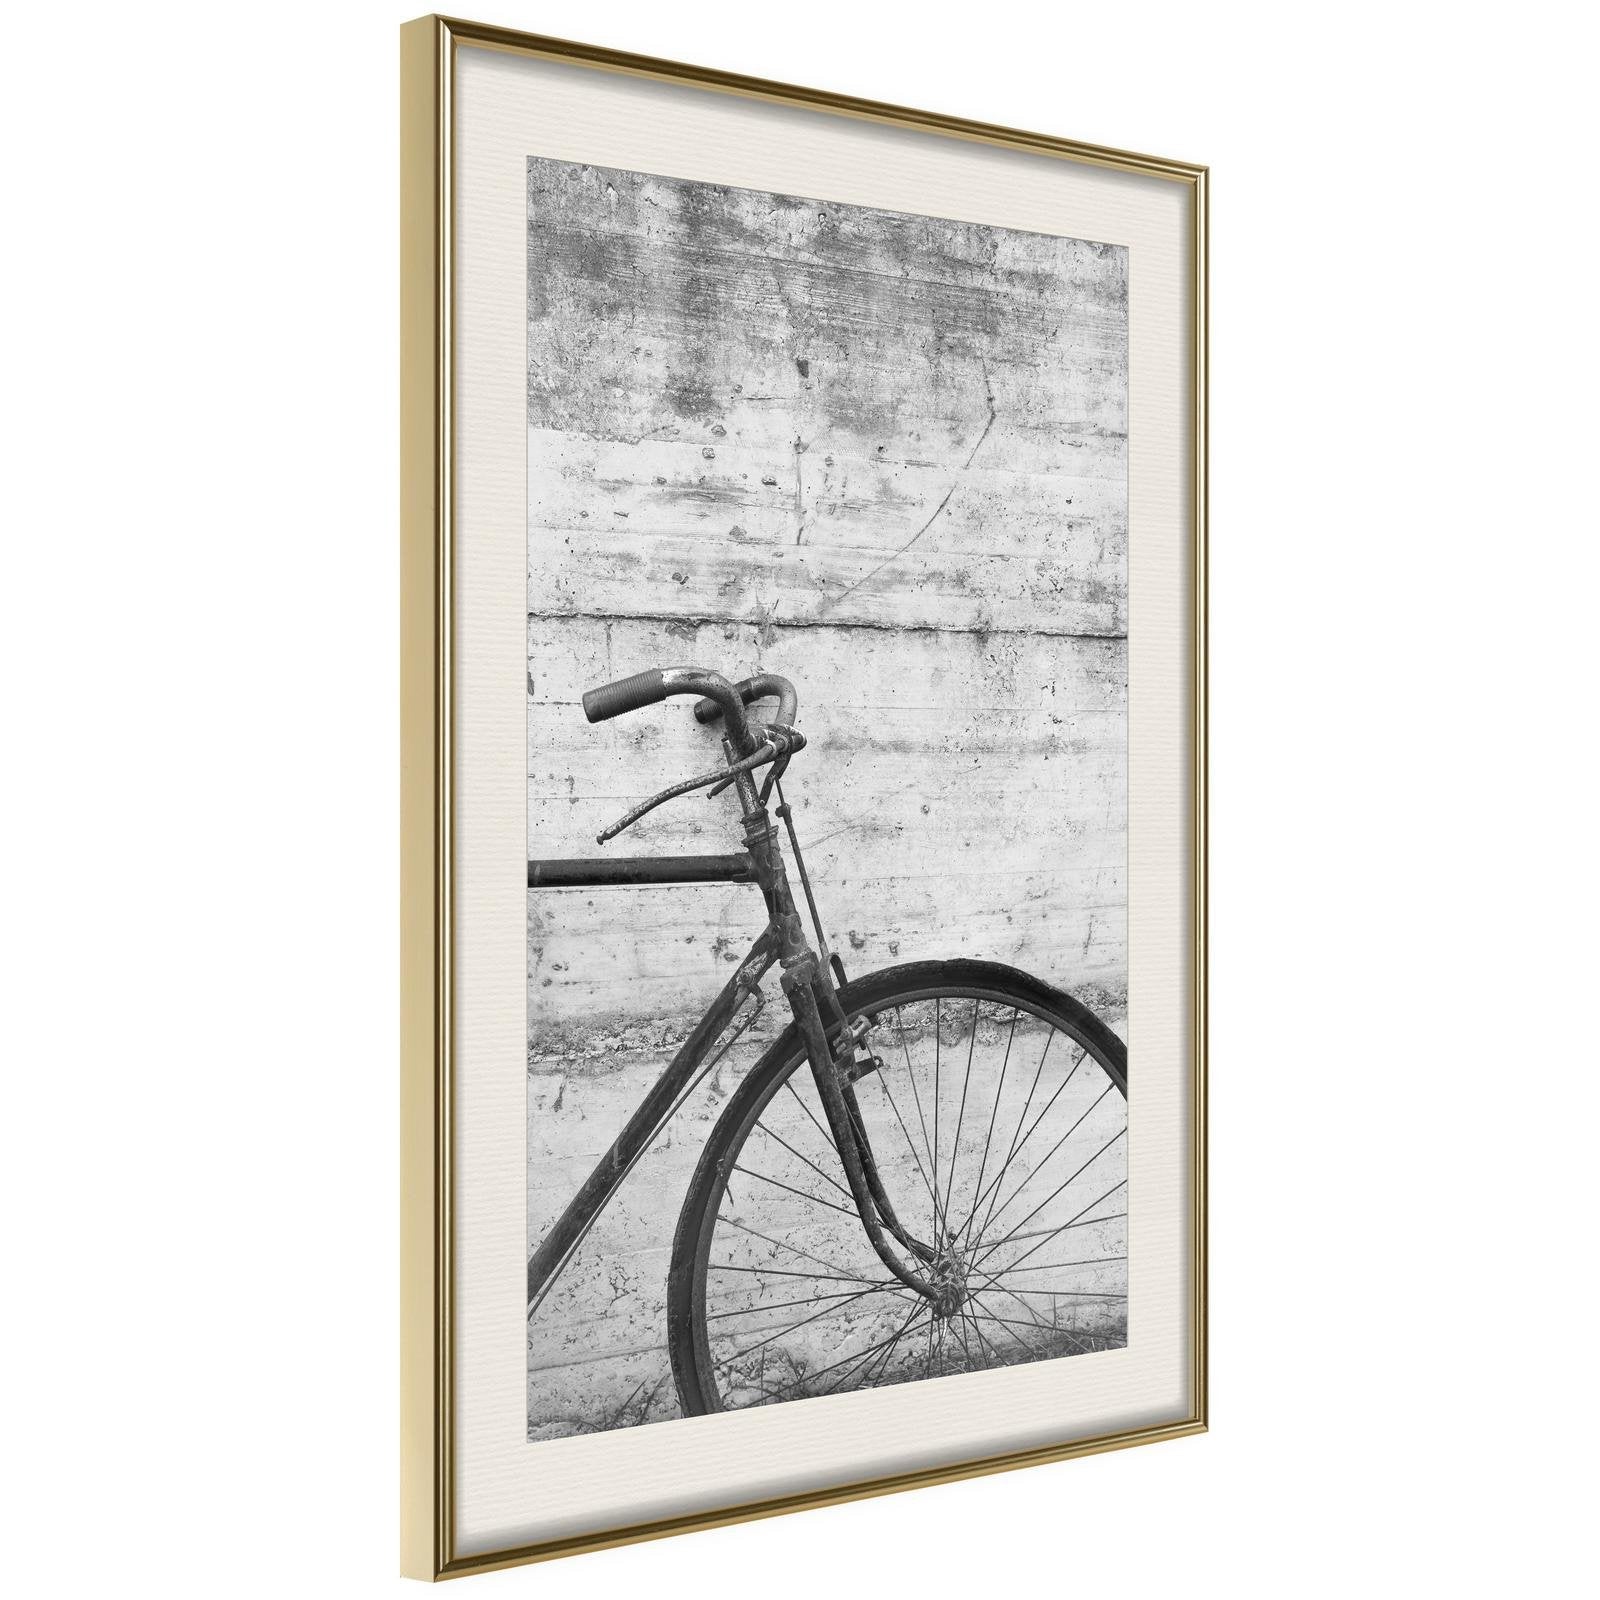 Inramad Poster / Tavla - Bicycle Leaning Against the Wall-Poster Inramad-Artgeist-20x30-Guldram med passepartout-peaceofhome.se